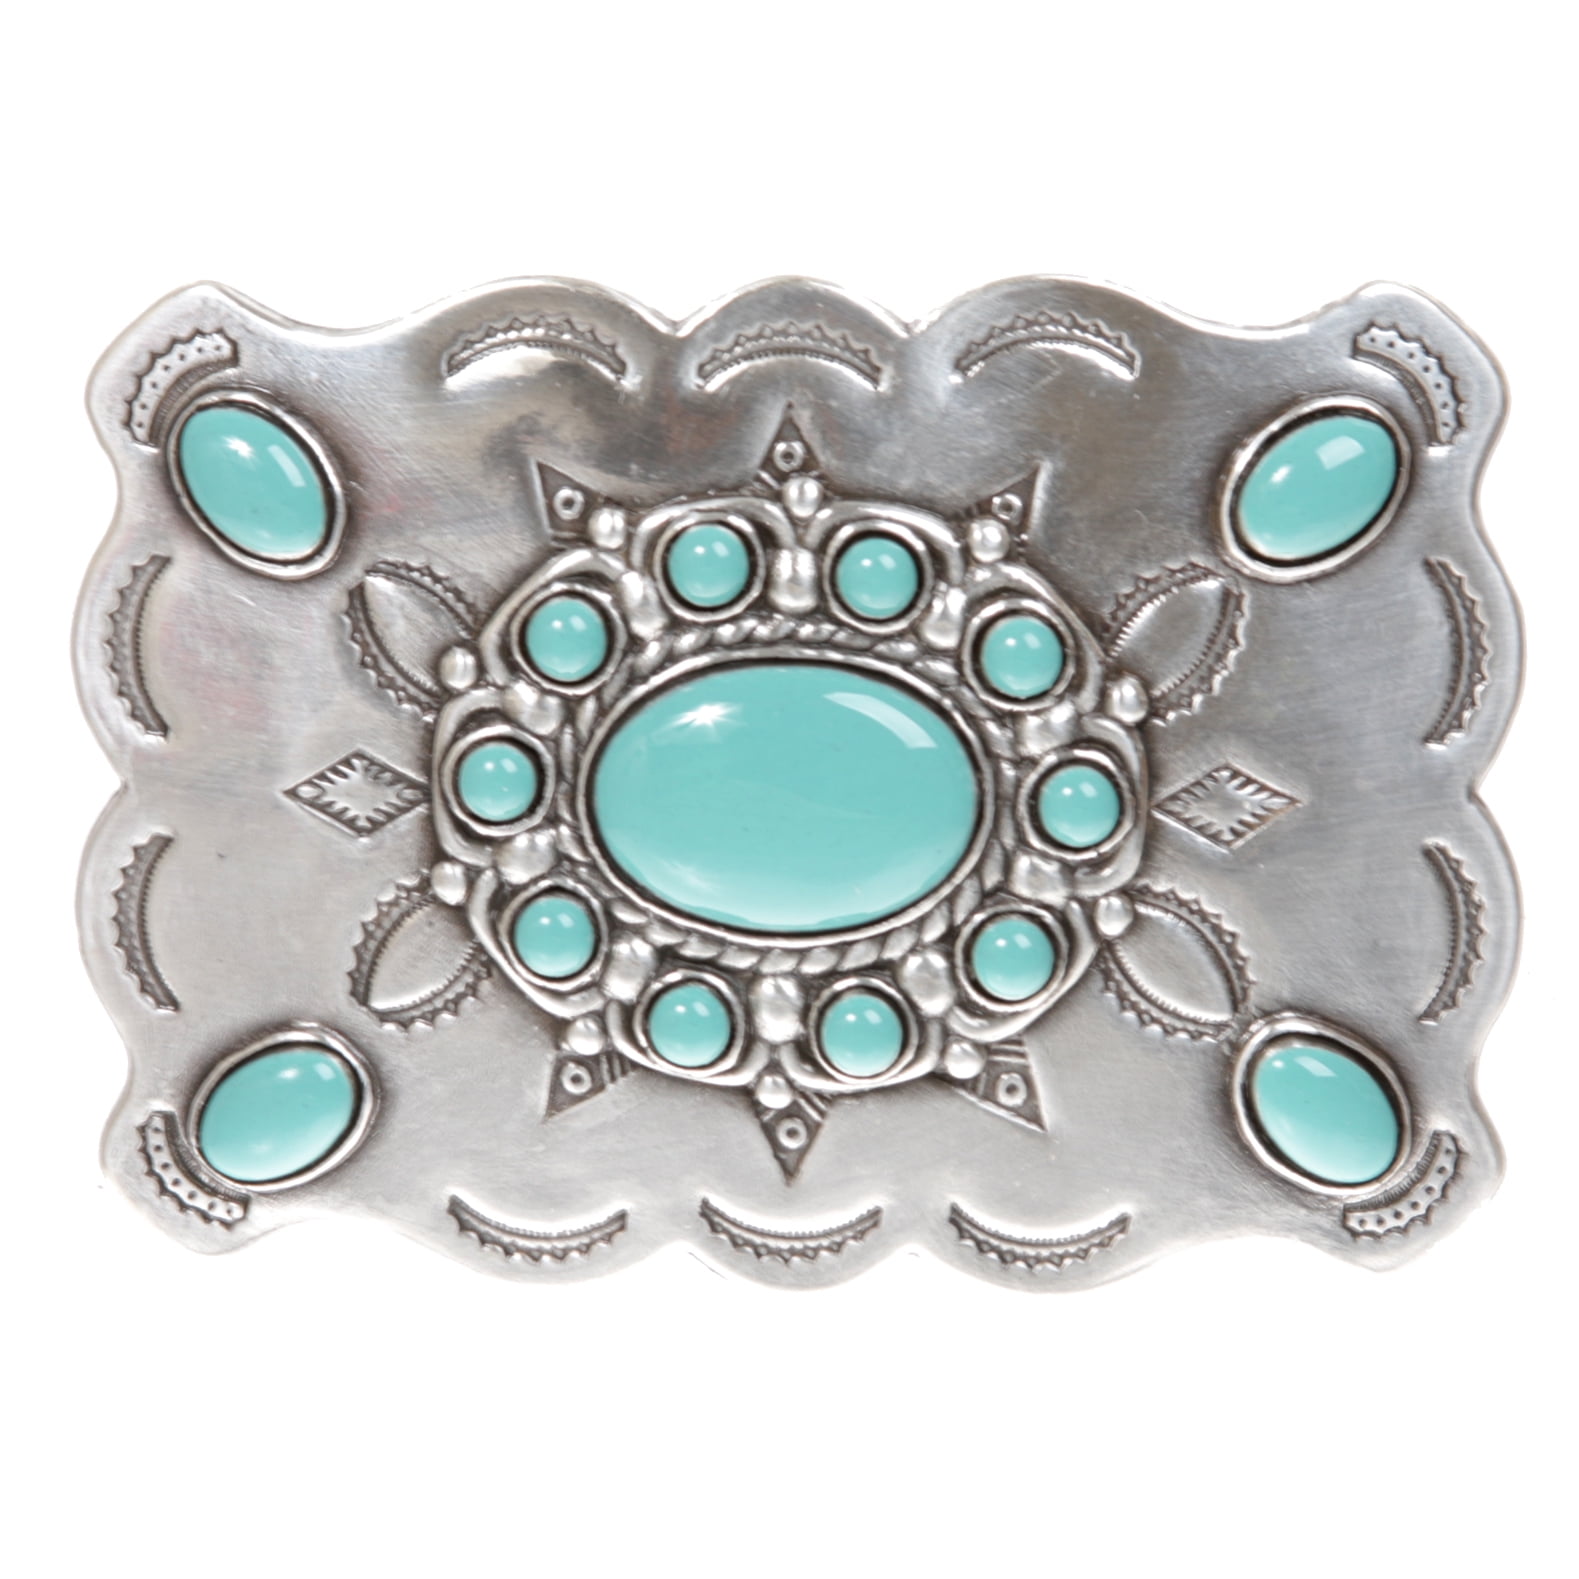 Vintage Silver Alloy Square Turquoise Floral Womens Western Belt Buckle GIFT BOX 